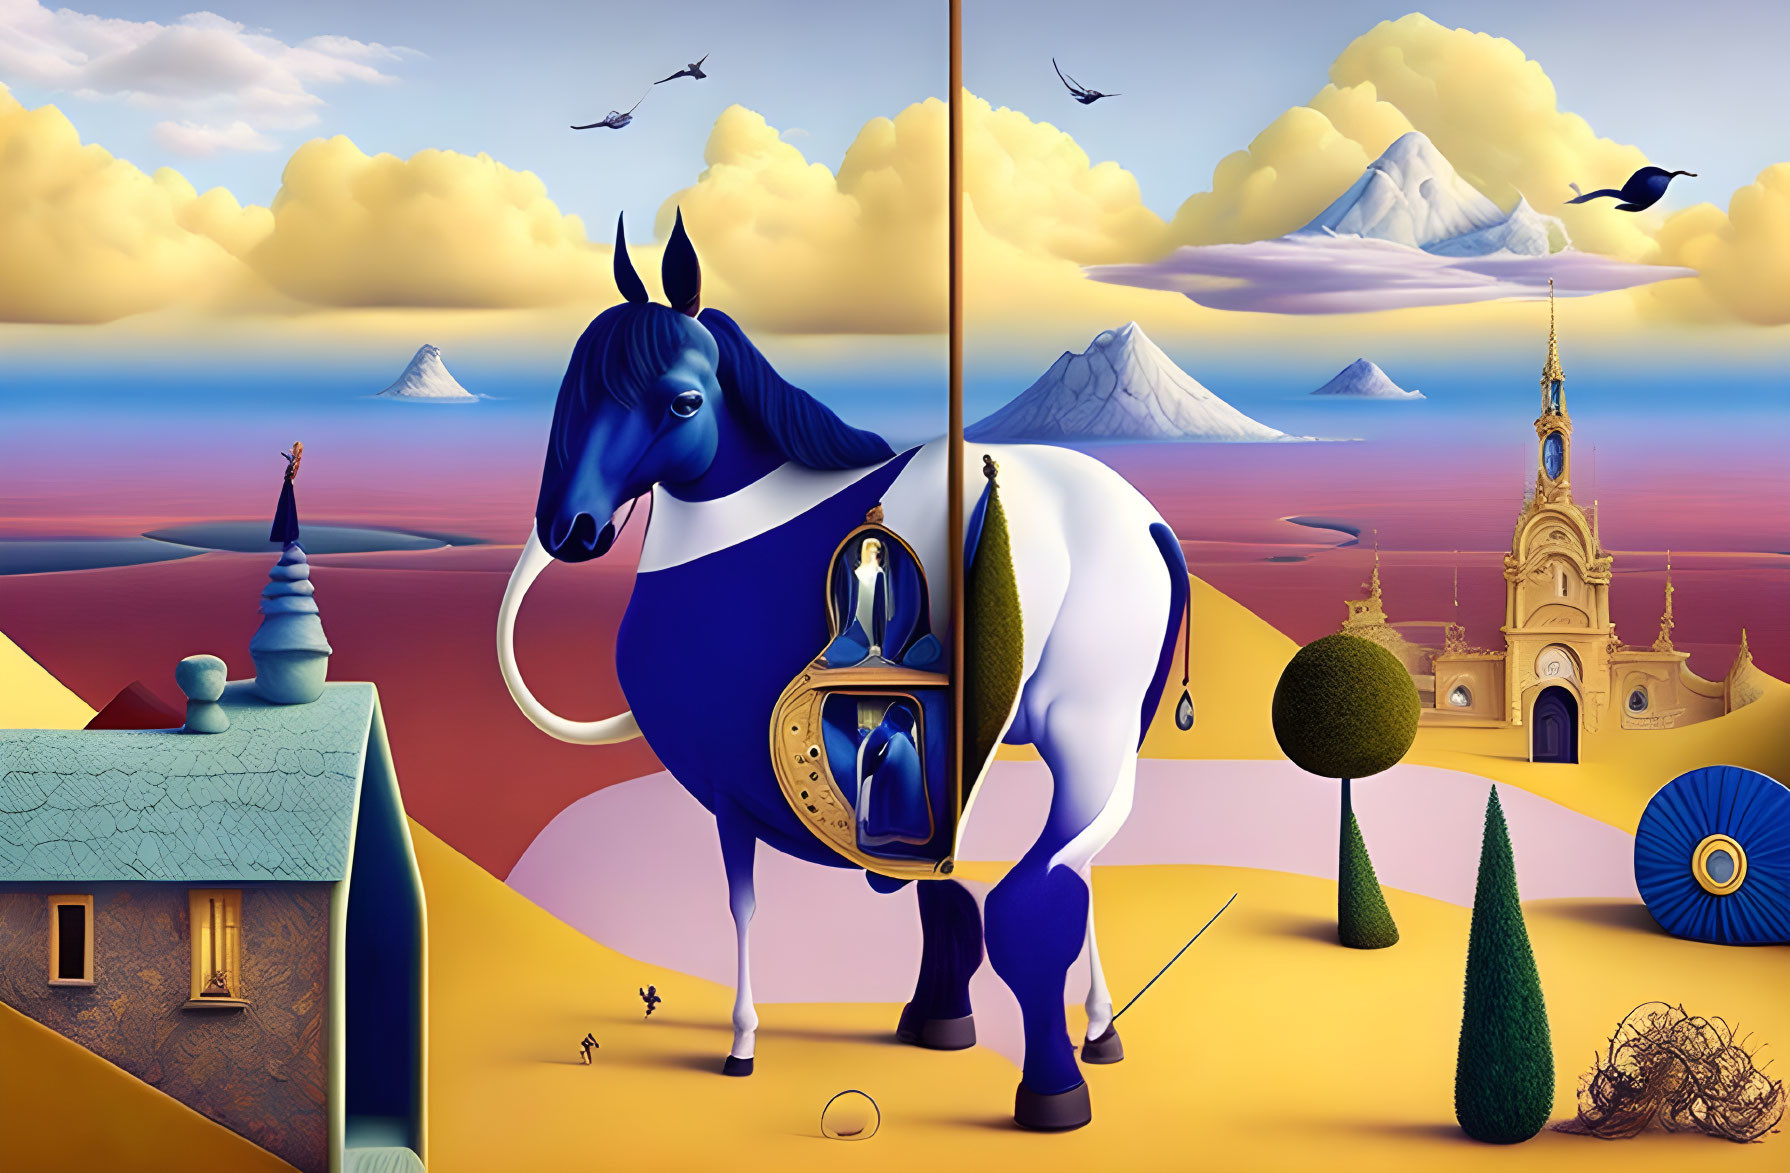 Surreal landscape featuring blue horse with lantern amidst whimsical structures